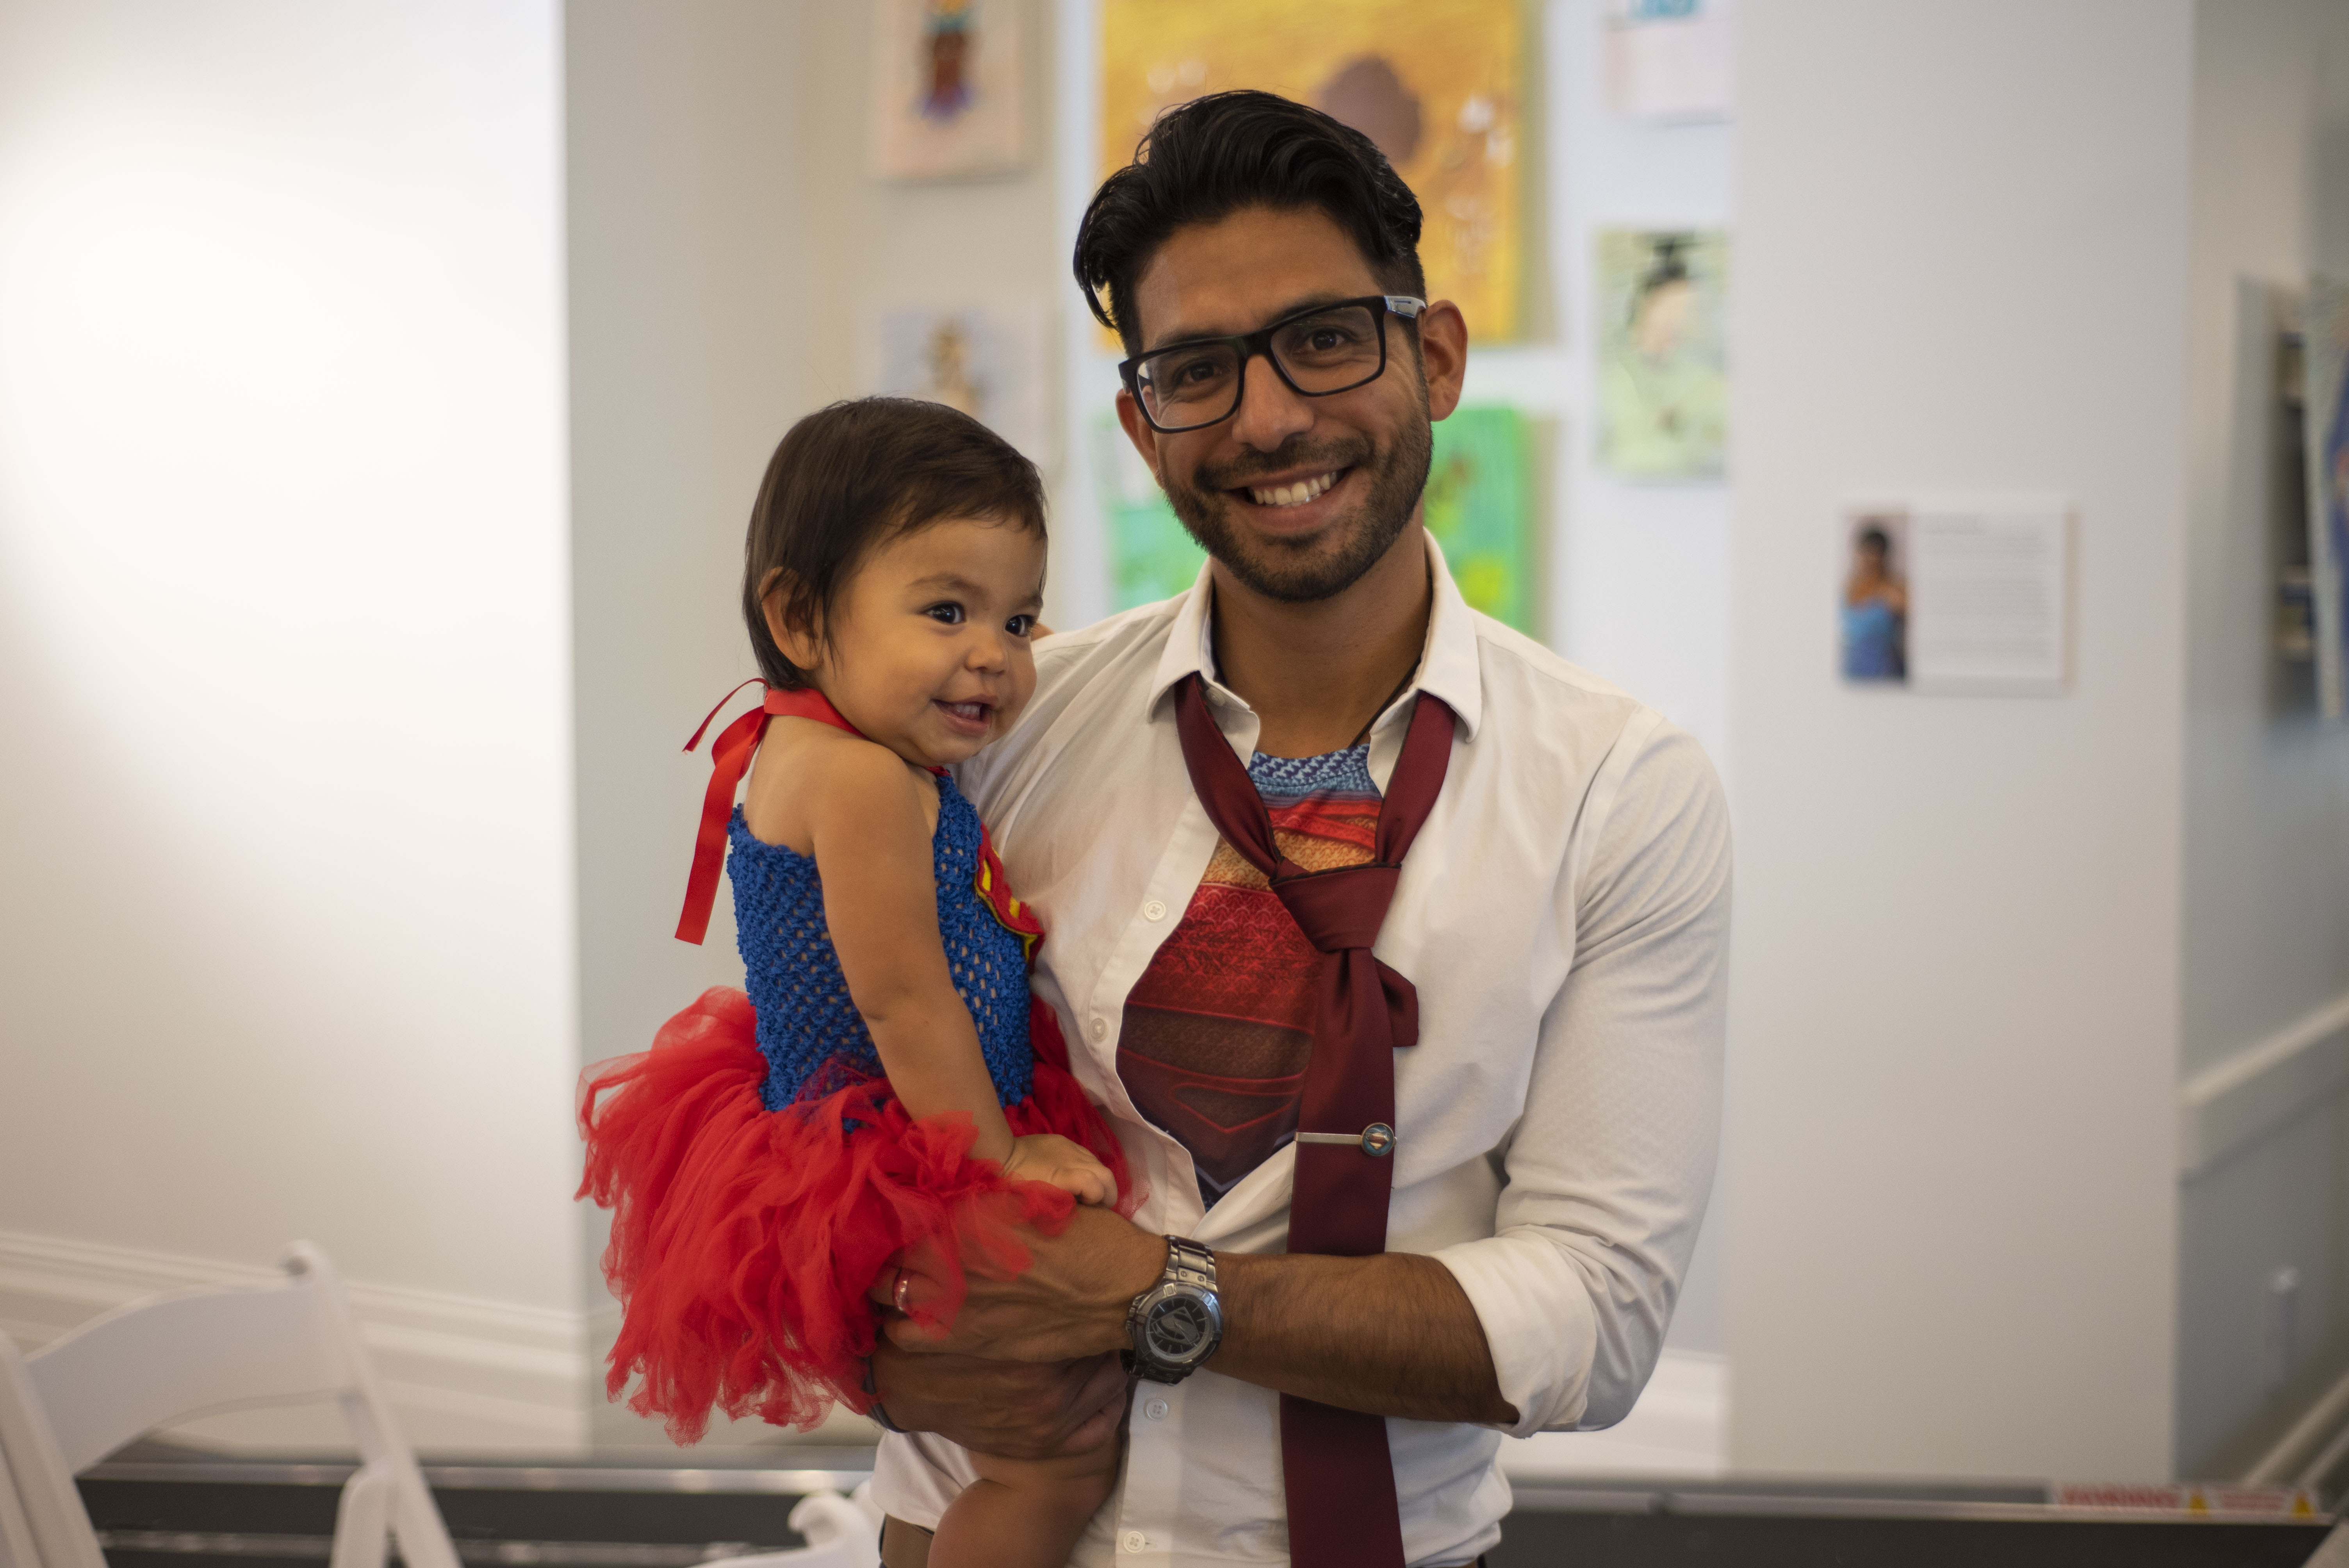 A father cosplays as Clark Kent/Superman. He's holding his daughter, who is dressed as Supergirl.